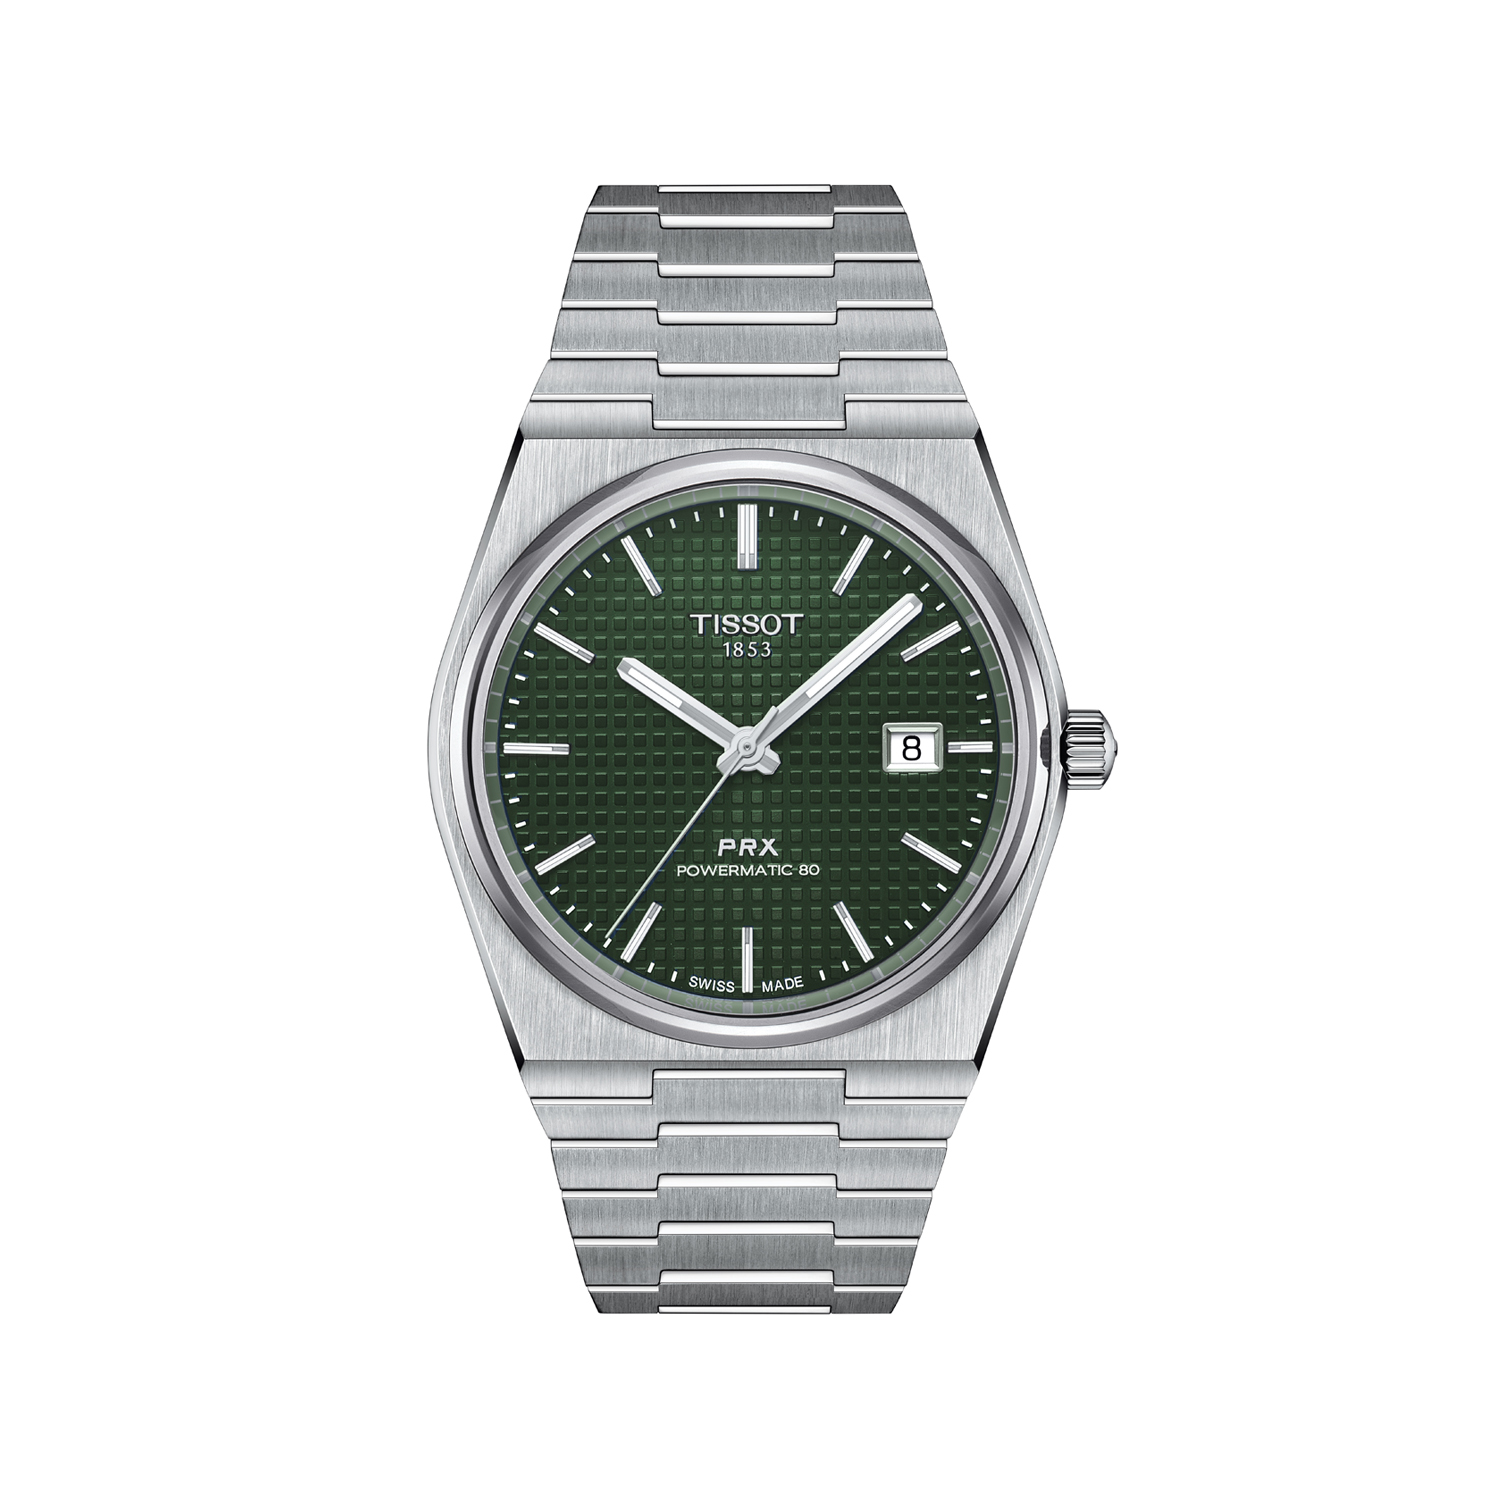 Tissot PRX Powermatic 80 Stainless Steel Watch - 40mm Green Dial